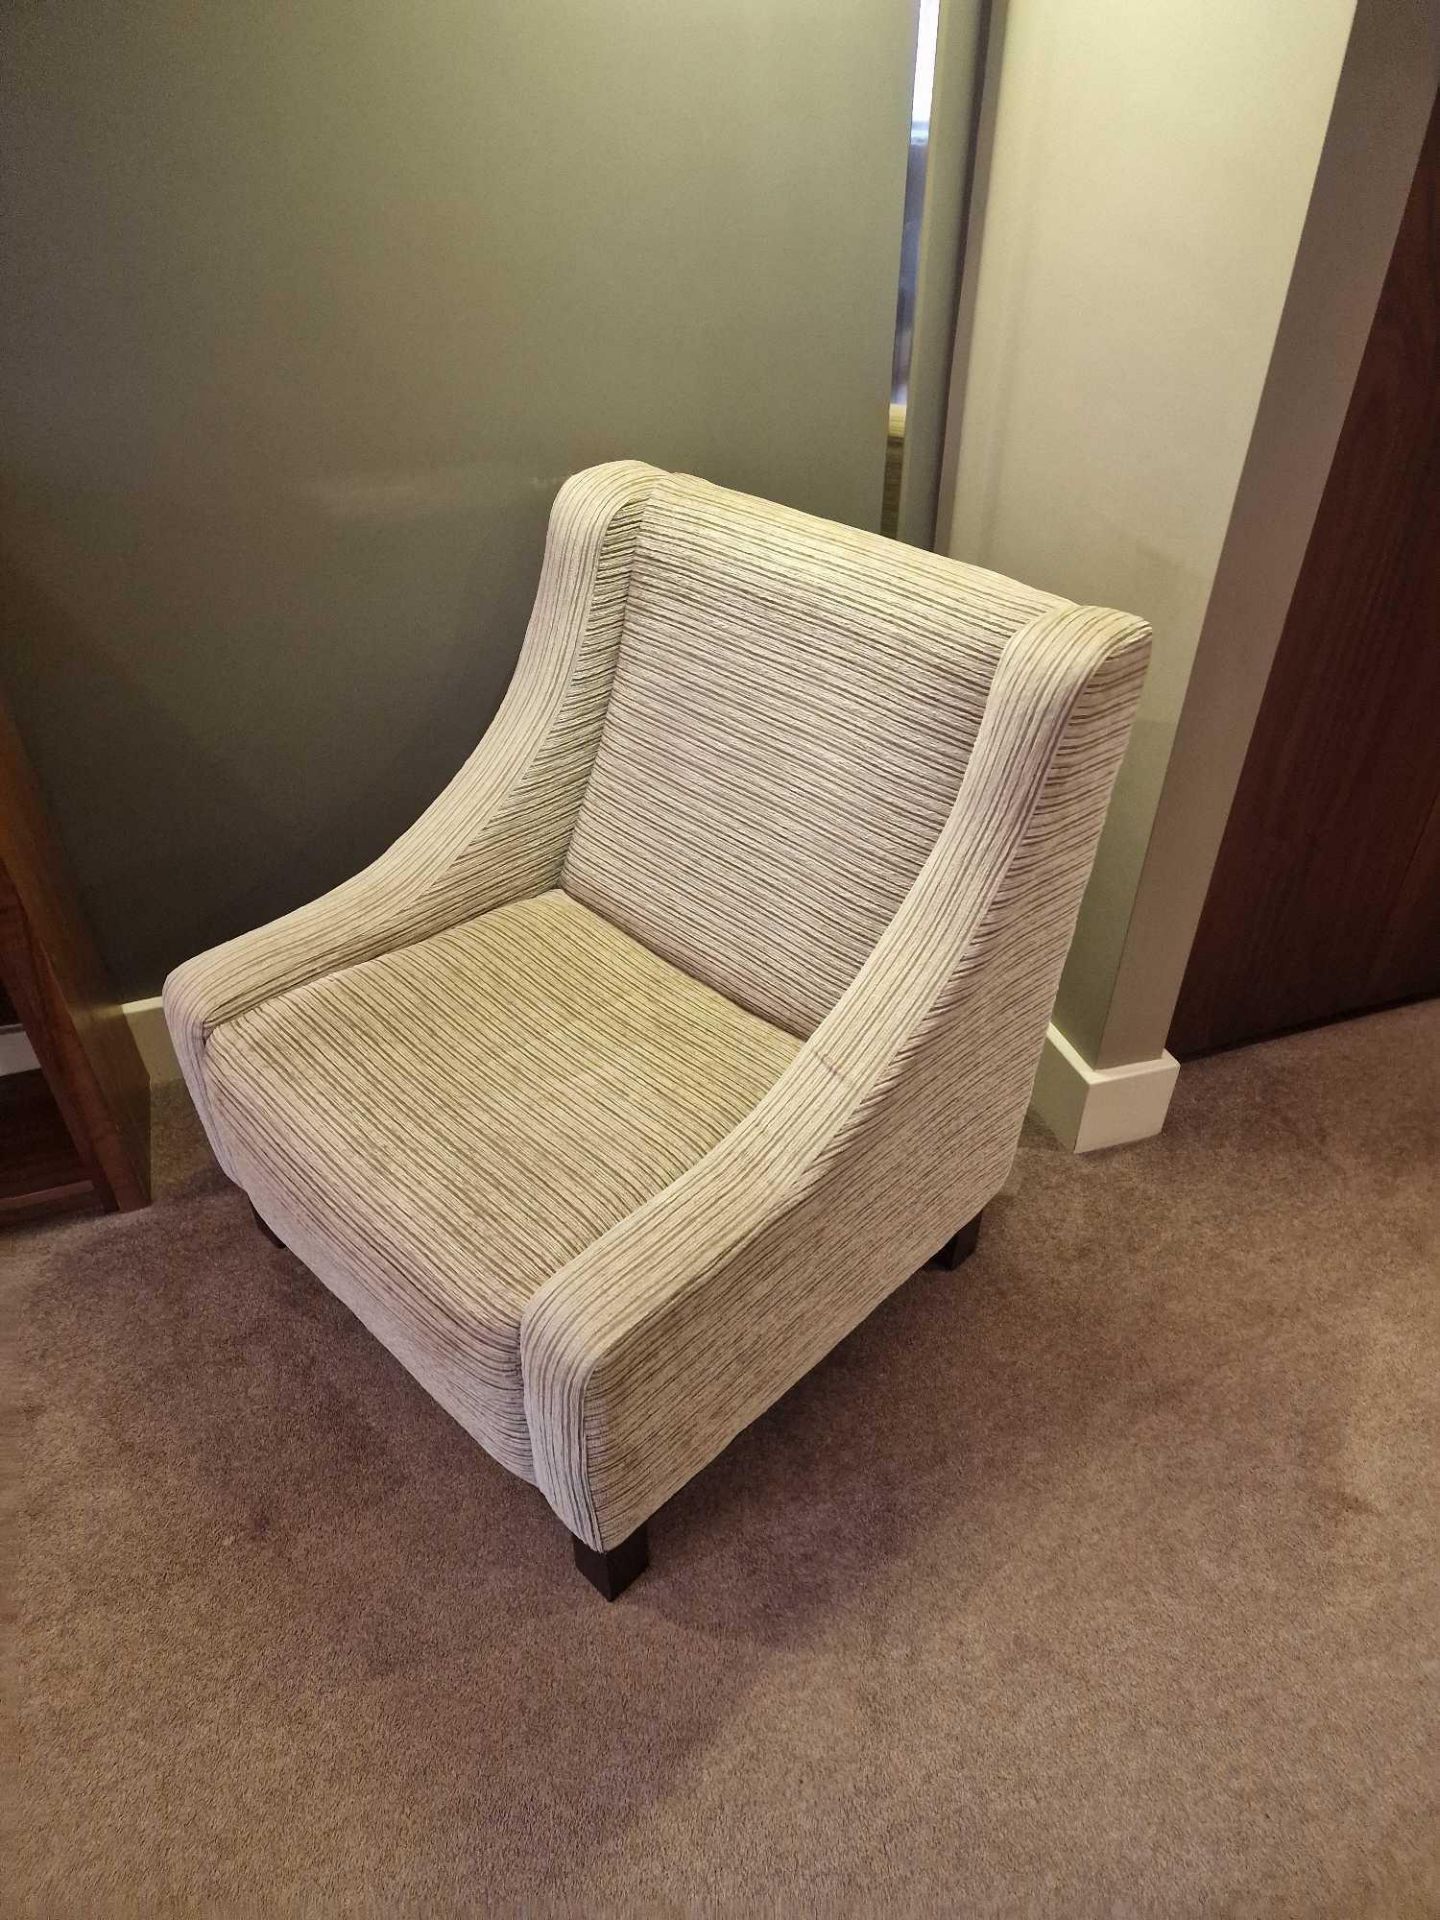 An upholstered relaxer chair 78 x 54 x 86cm ( Location : 207)